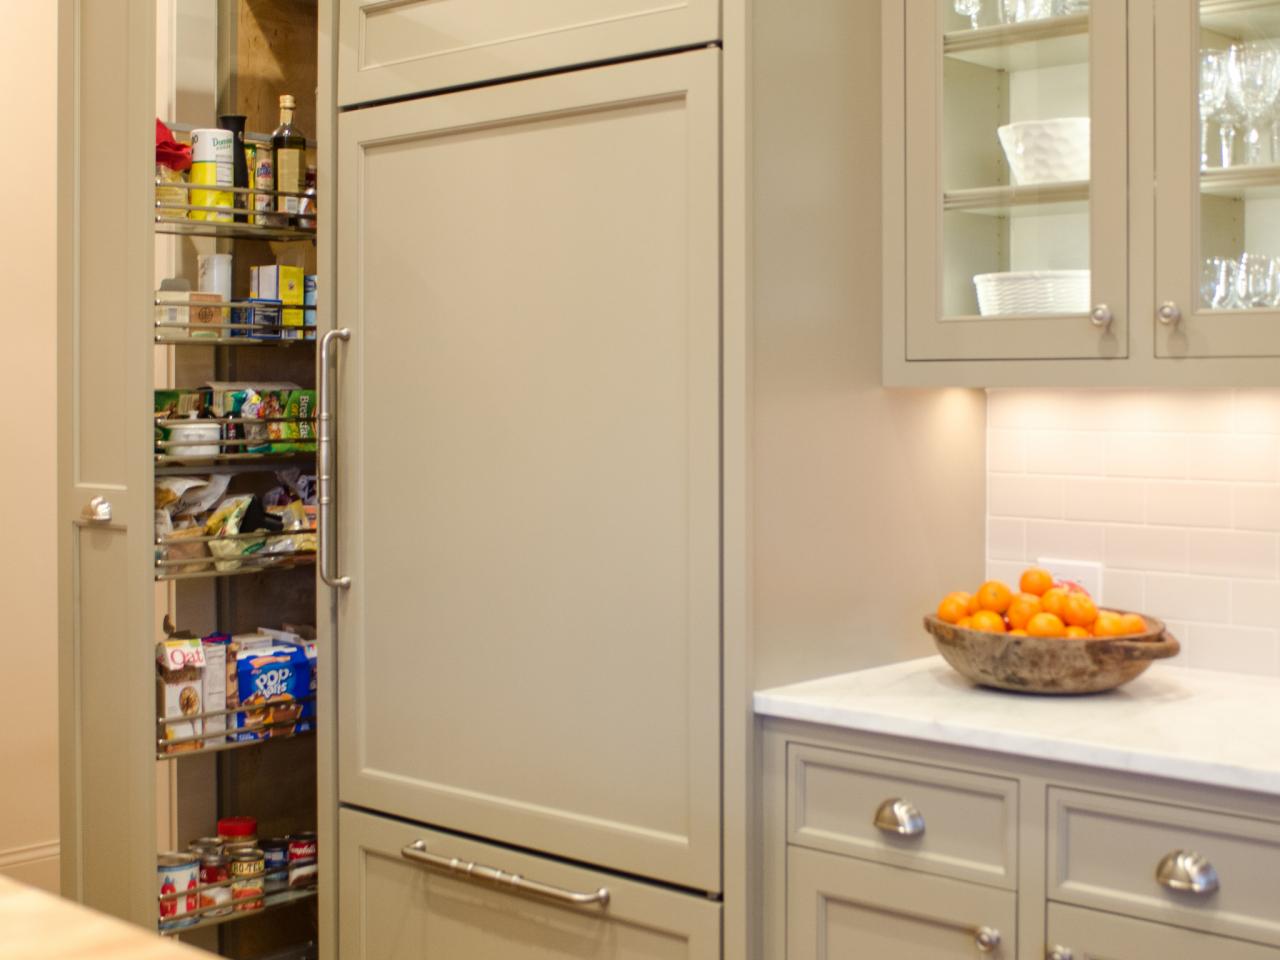 Pantry Cabinet Plans Pictures Options, Small Cabinet For Pantry